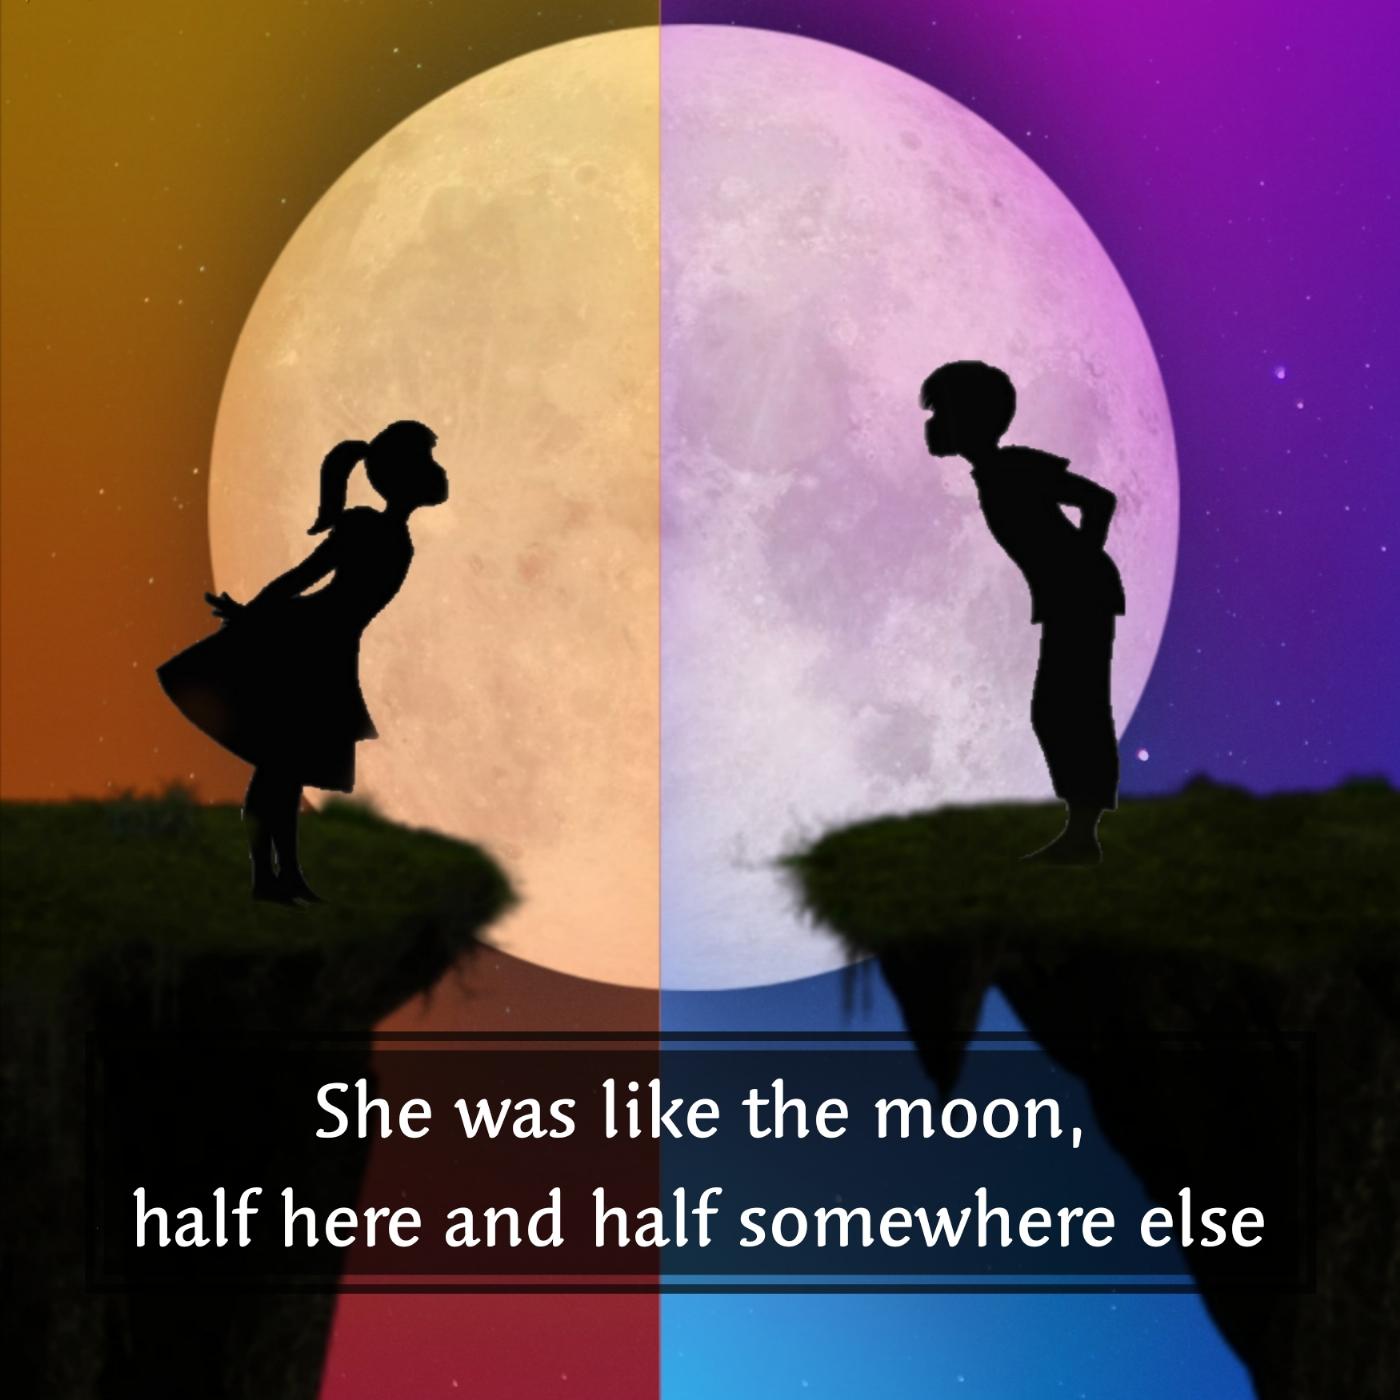 She was like the moon half here and half somewhere else